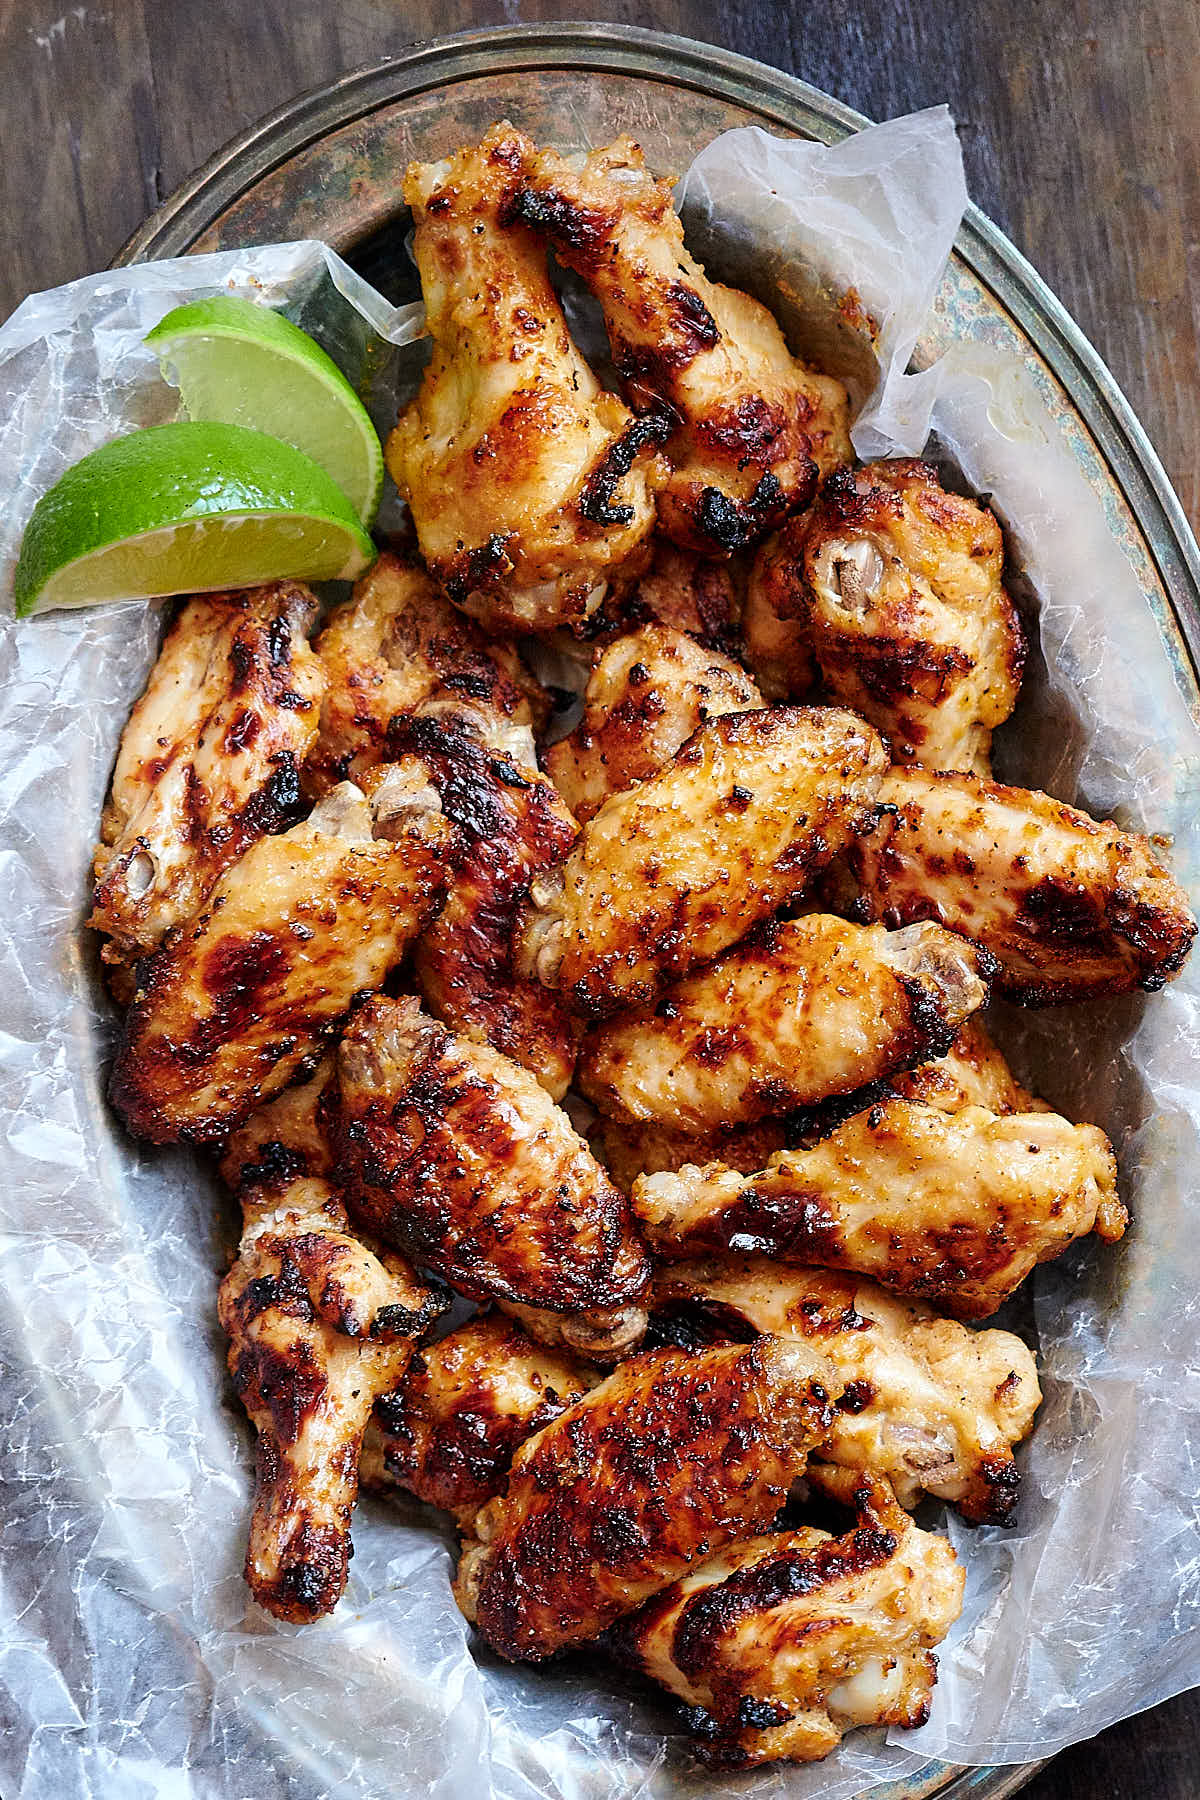 Broiled chicken wings, with lime wedges on the side, on white wax paper in a serving basket.